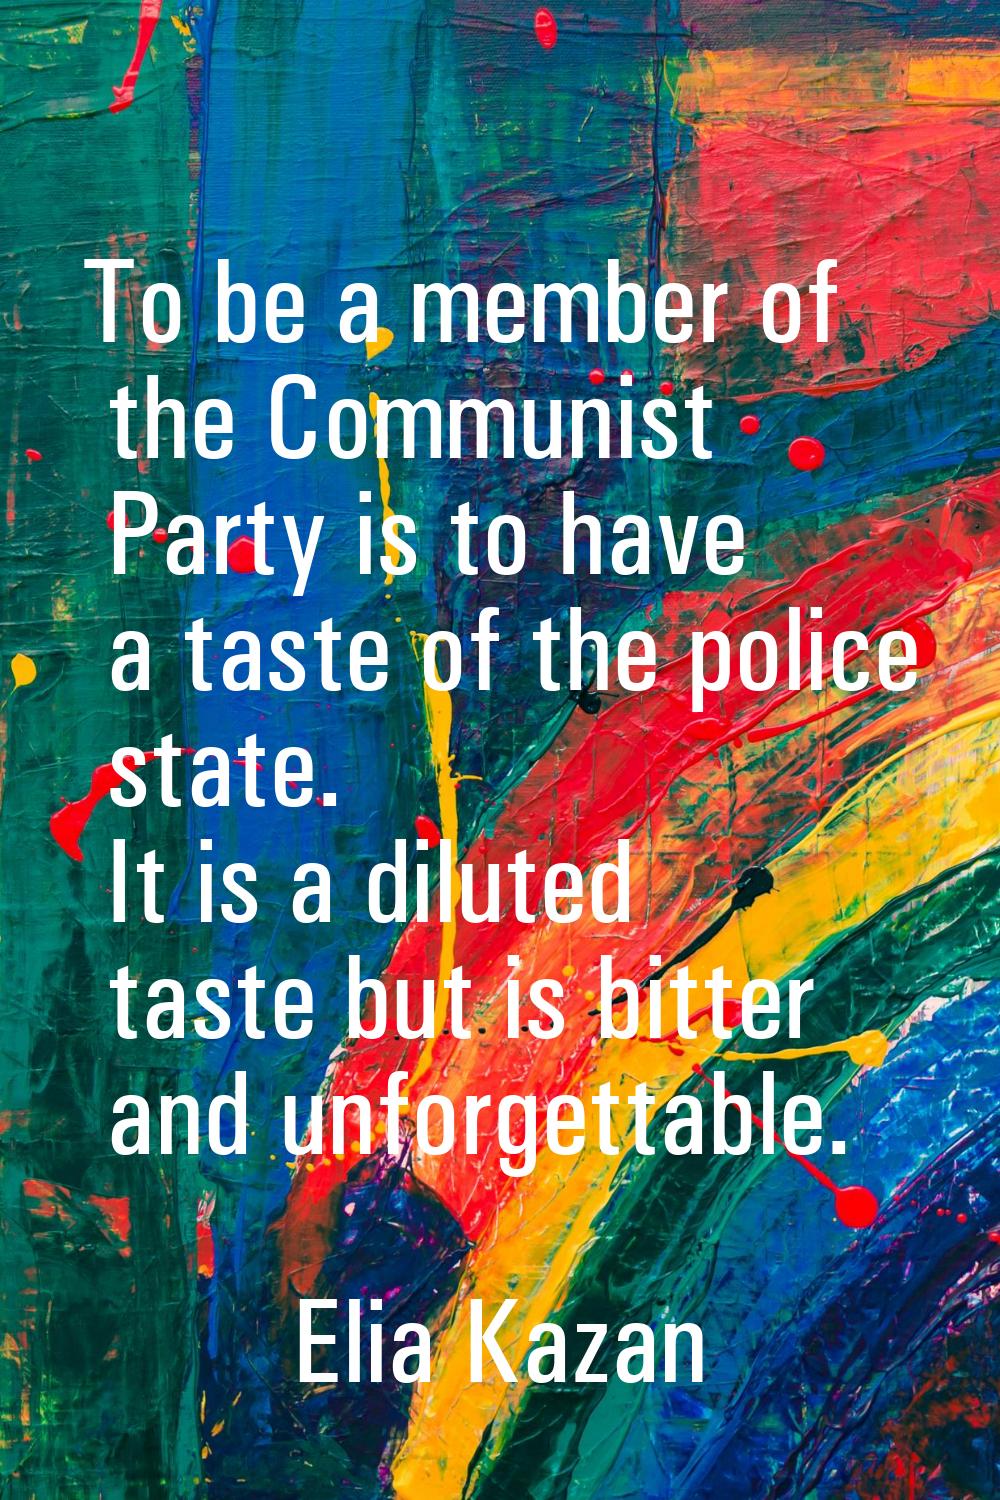 To be a member of the Communist Party is to have a taste of the police state. It is a diluted taste